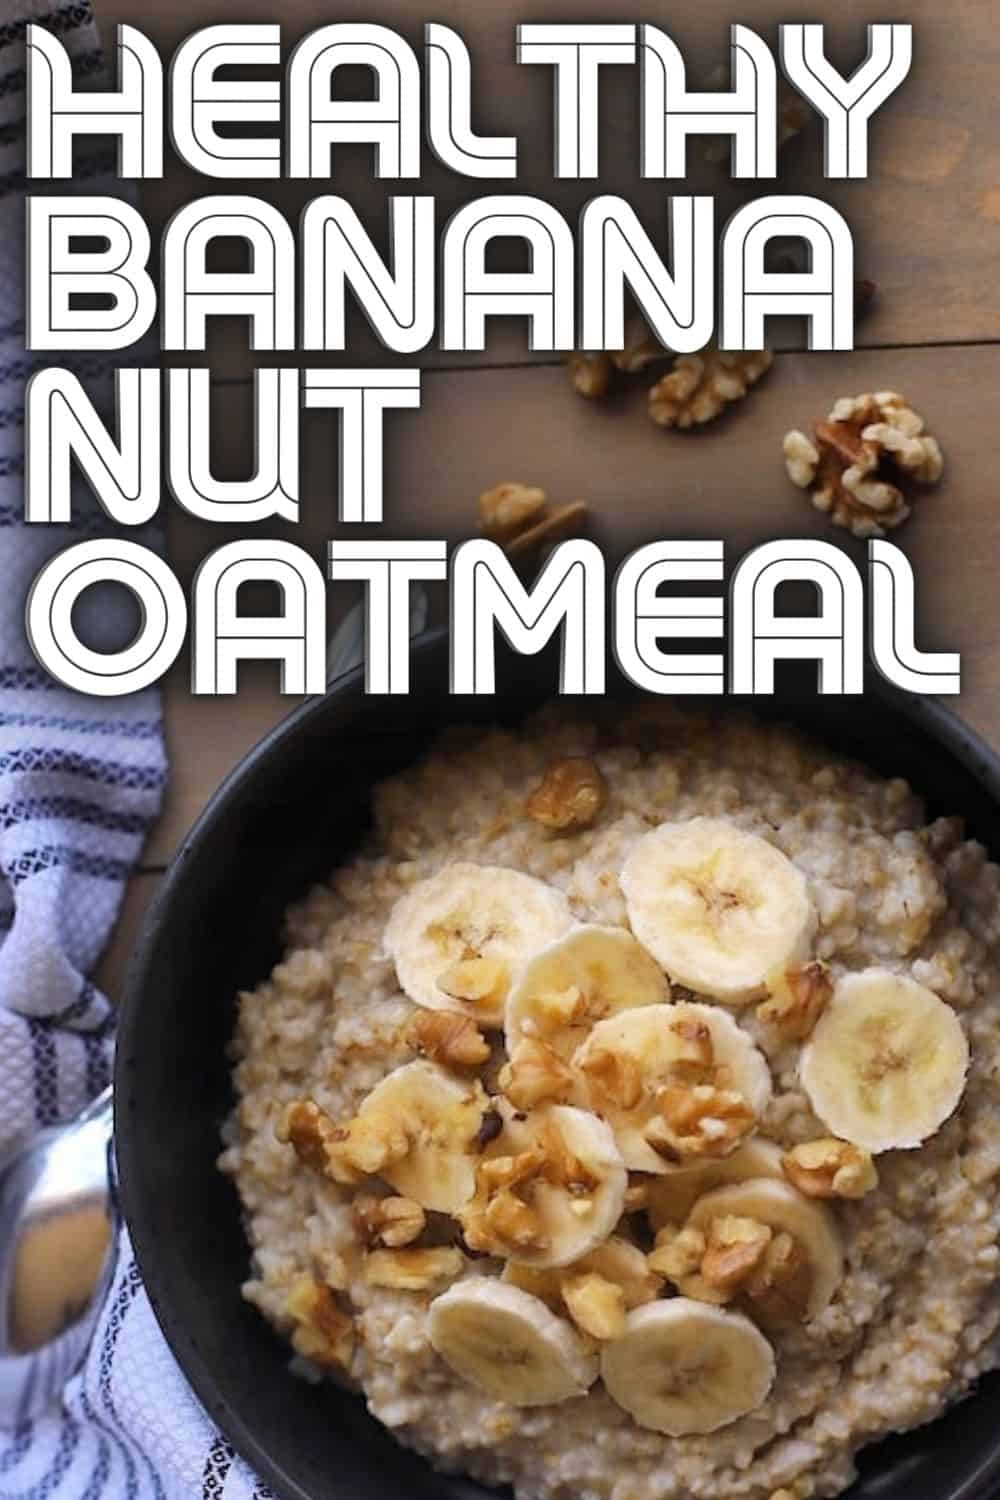 Oatmeal with banana and nuts in a black bowl on Pinterest image.